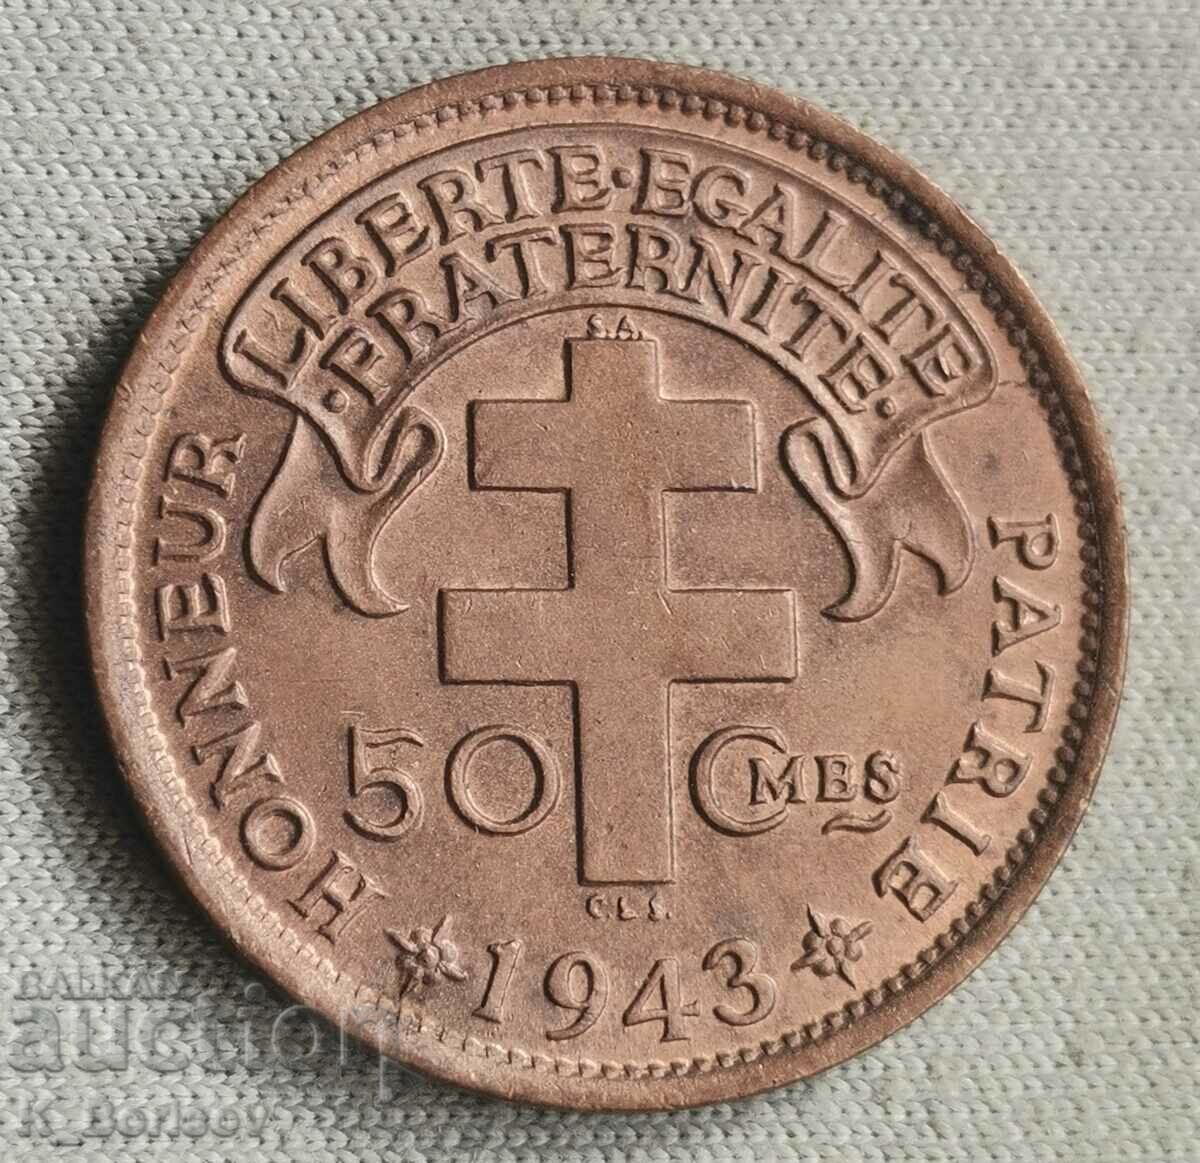 French Equatorial Africa 50 centimes 1943